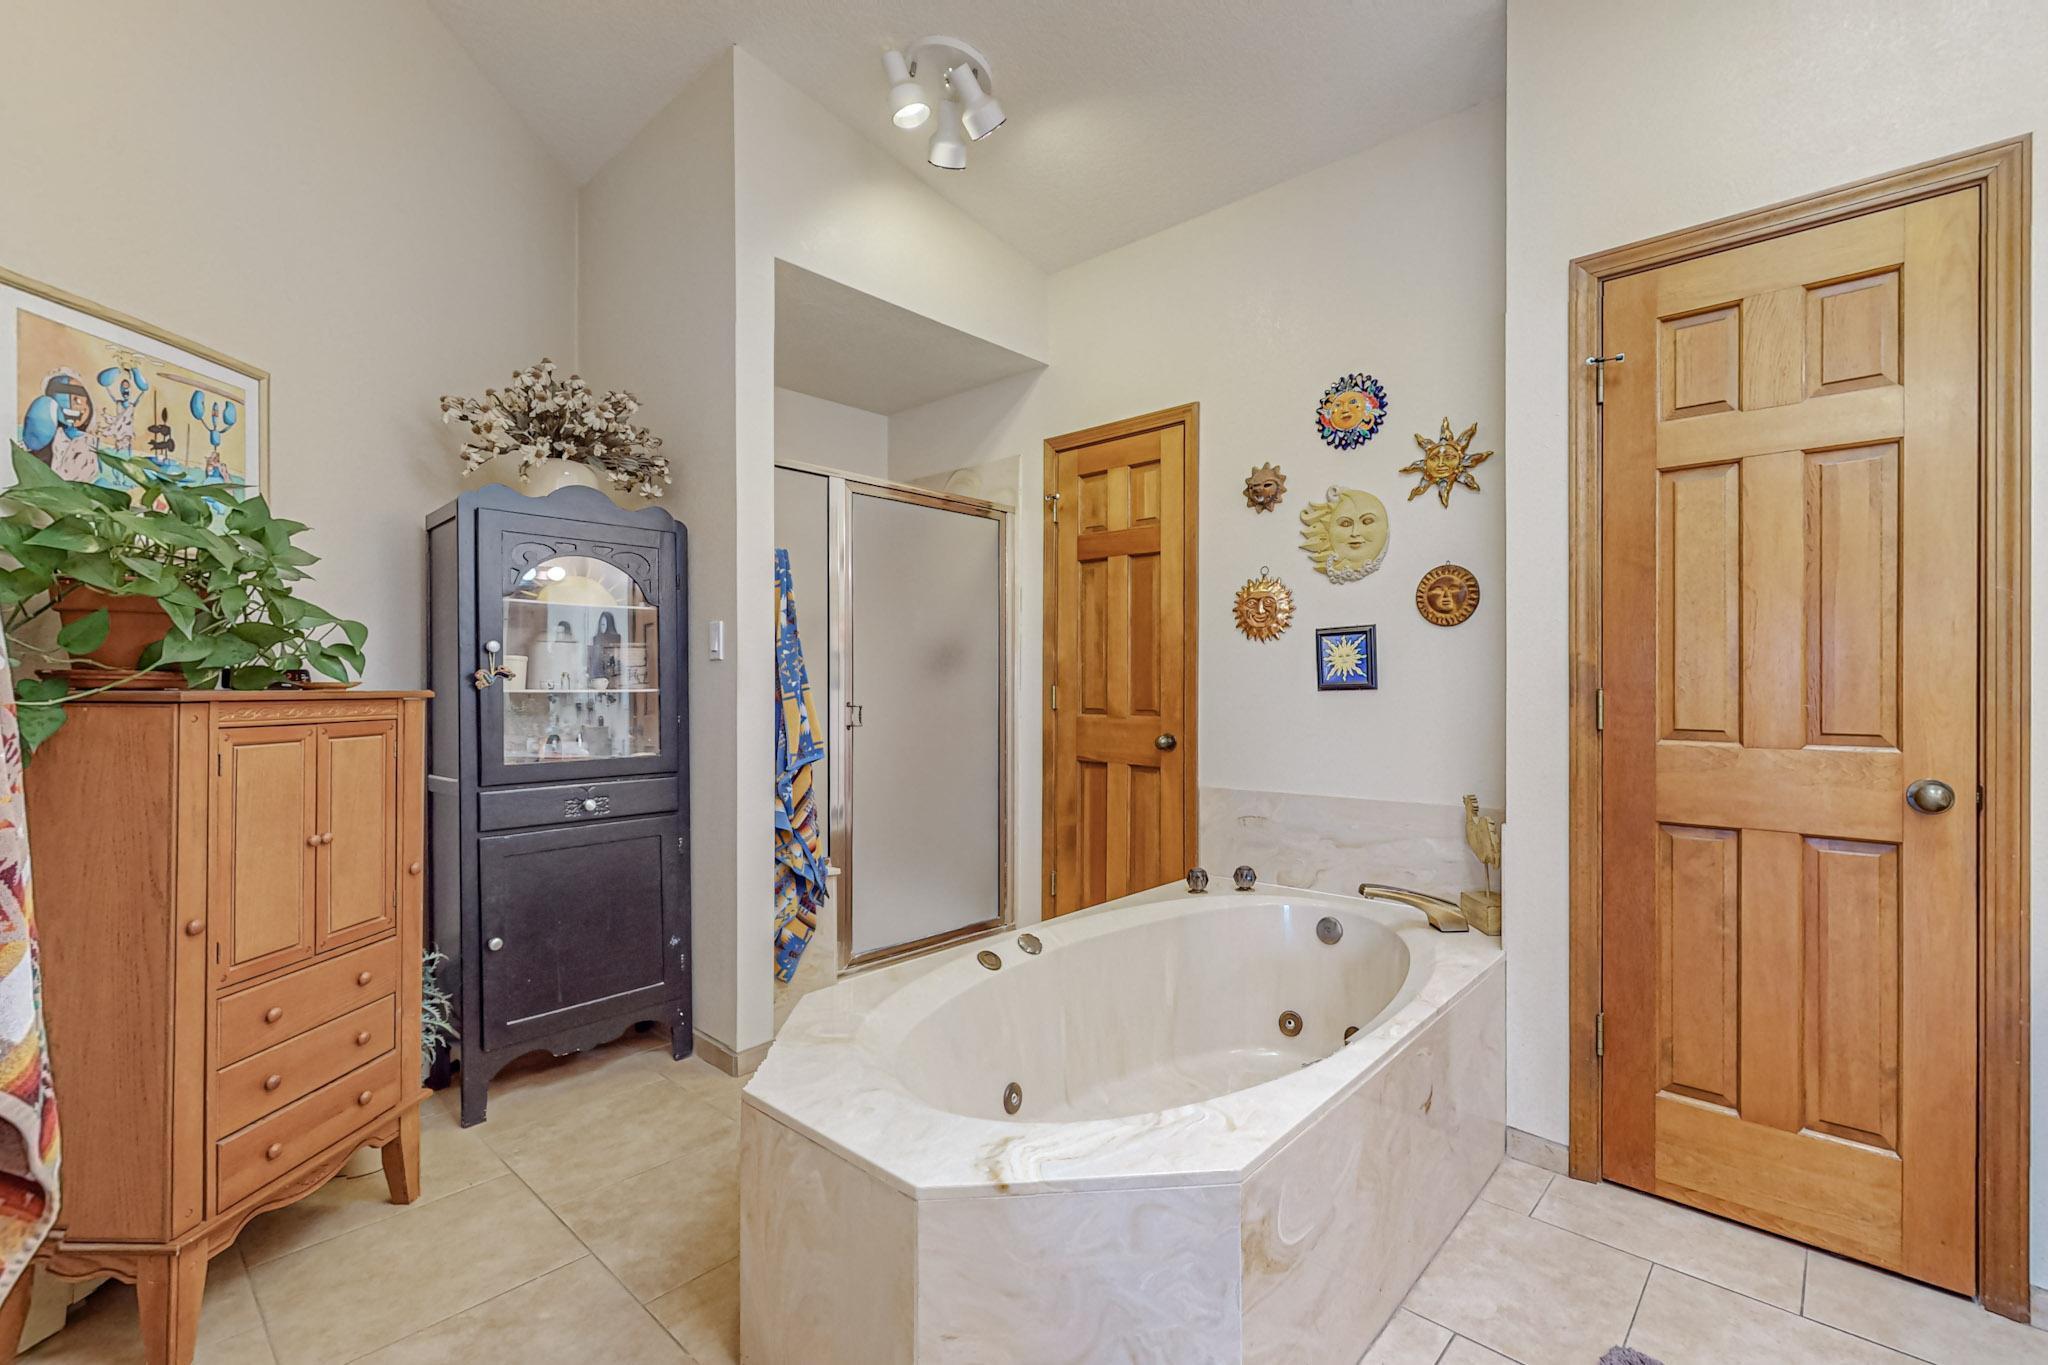 8116 Fairmont Drive NW, Albuquerque, New Mexico 87120, 3 Bedrooms Bedrooms, ,2 BathroomsBathrooms,Residential,For Sale,8116 Fairmont Drive NW,1061395